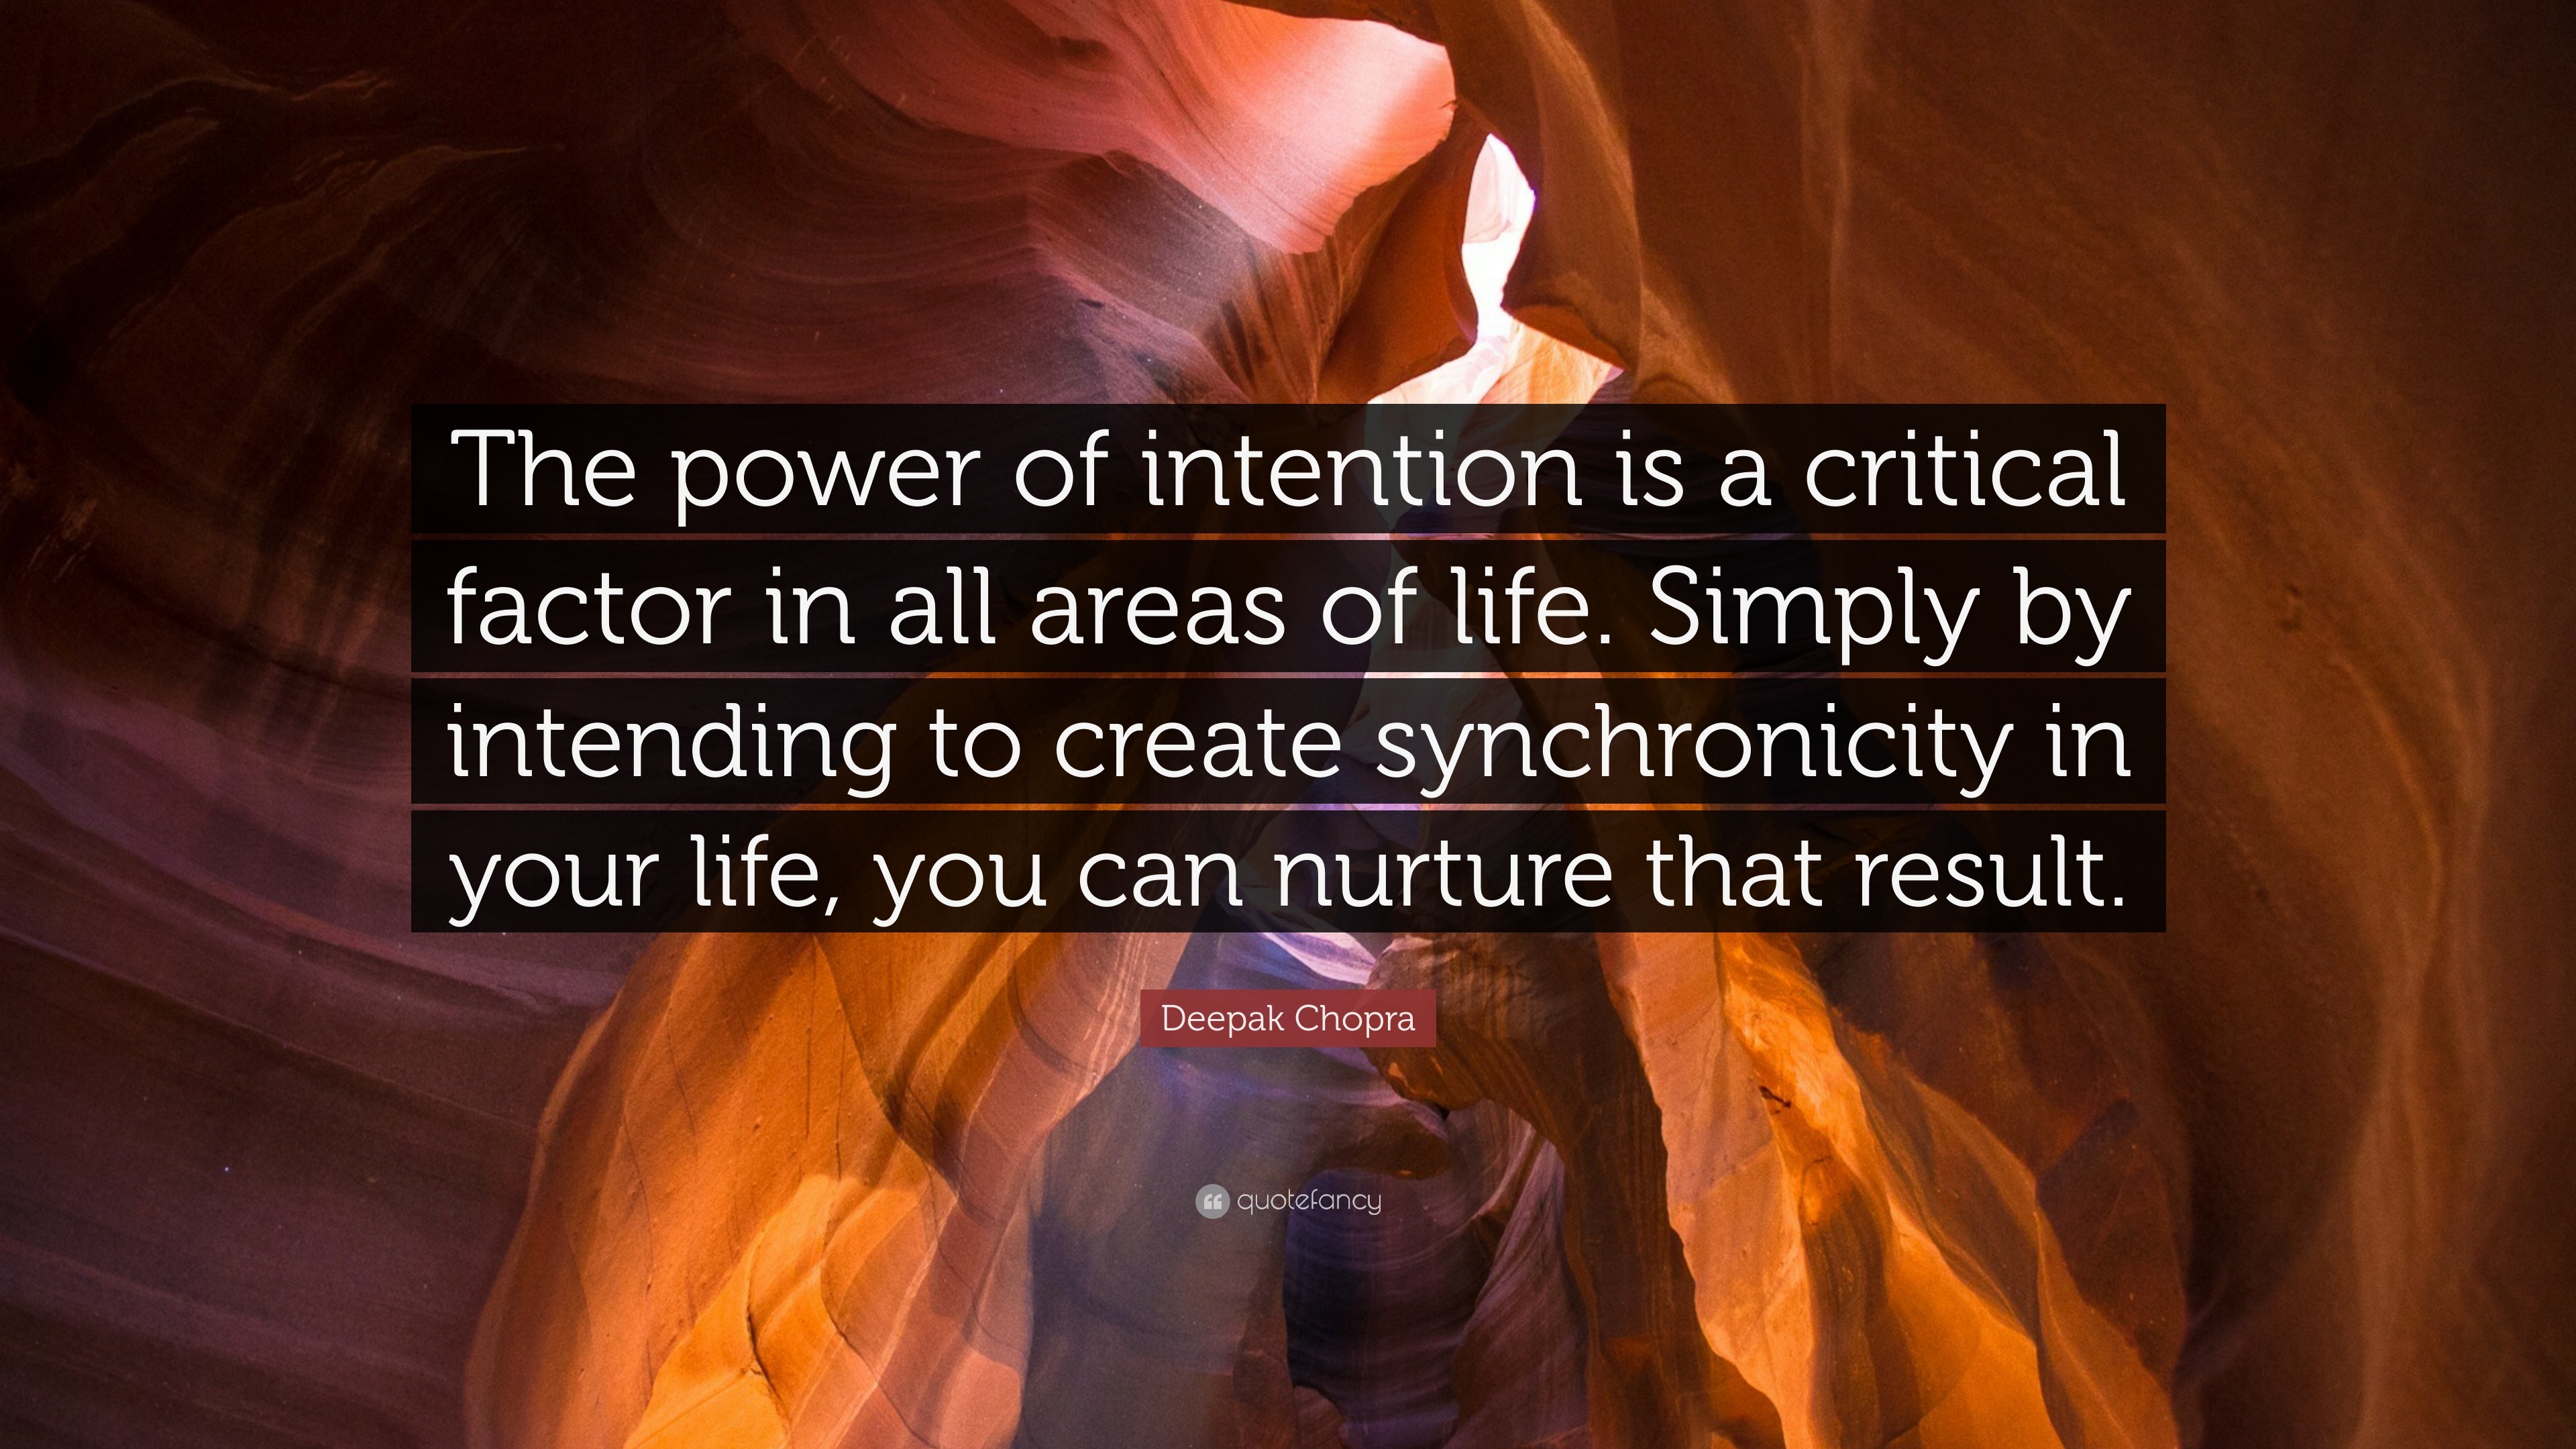 Deepak Chopra Quote: “The power of intention is a critical factor in